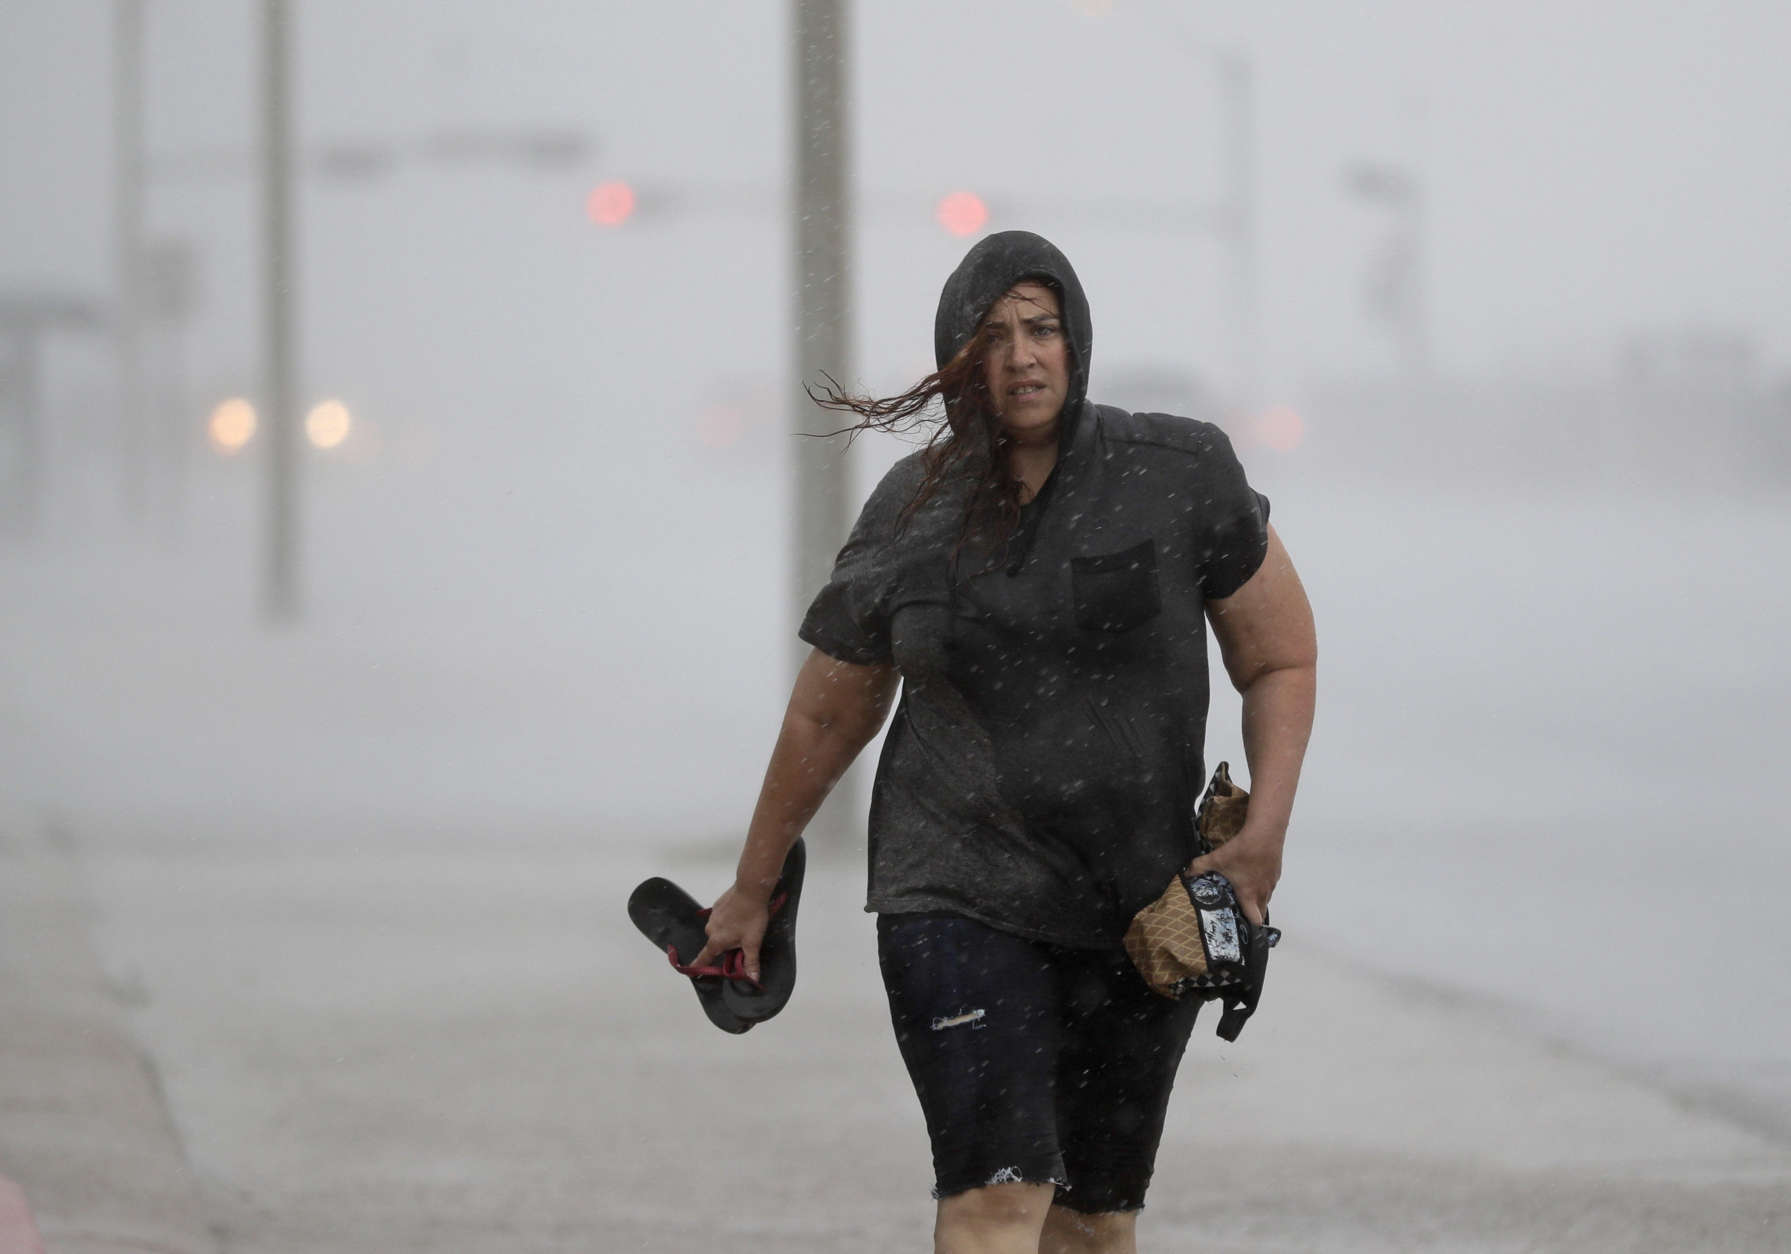 Hillary Lebeb walks along the seawall in Galveston, Texas as Hurricane Harvey intensifies in the Gulf of Mexico Friday, Aug. 25, 2017. Harvey is forecast to be a major hurricane when it makes landfall along the middle Texas coastline. (AP Photo/David J. Phillip)